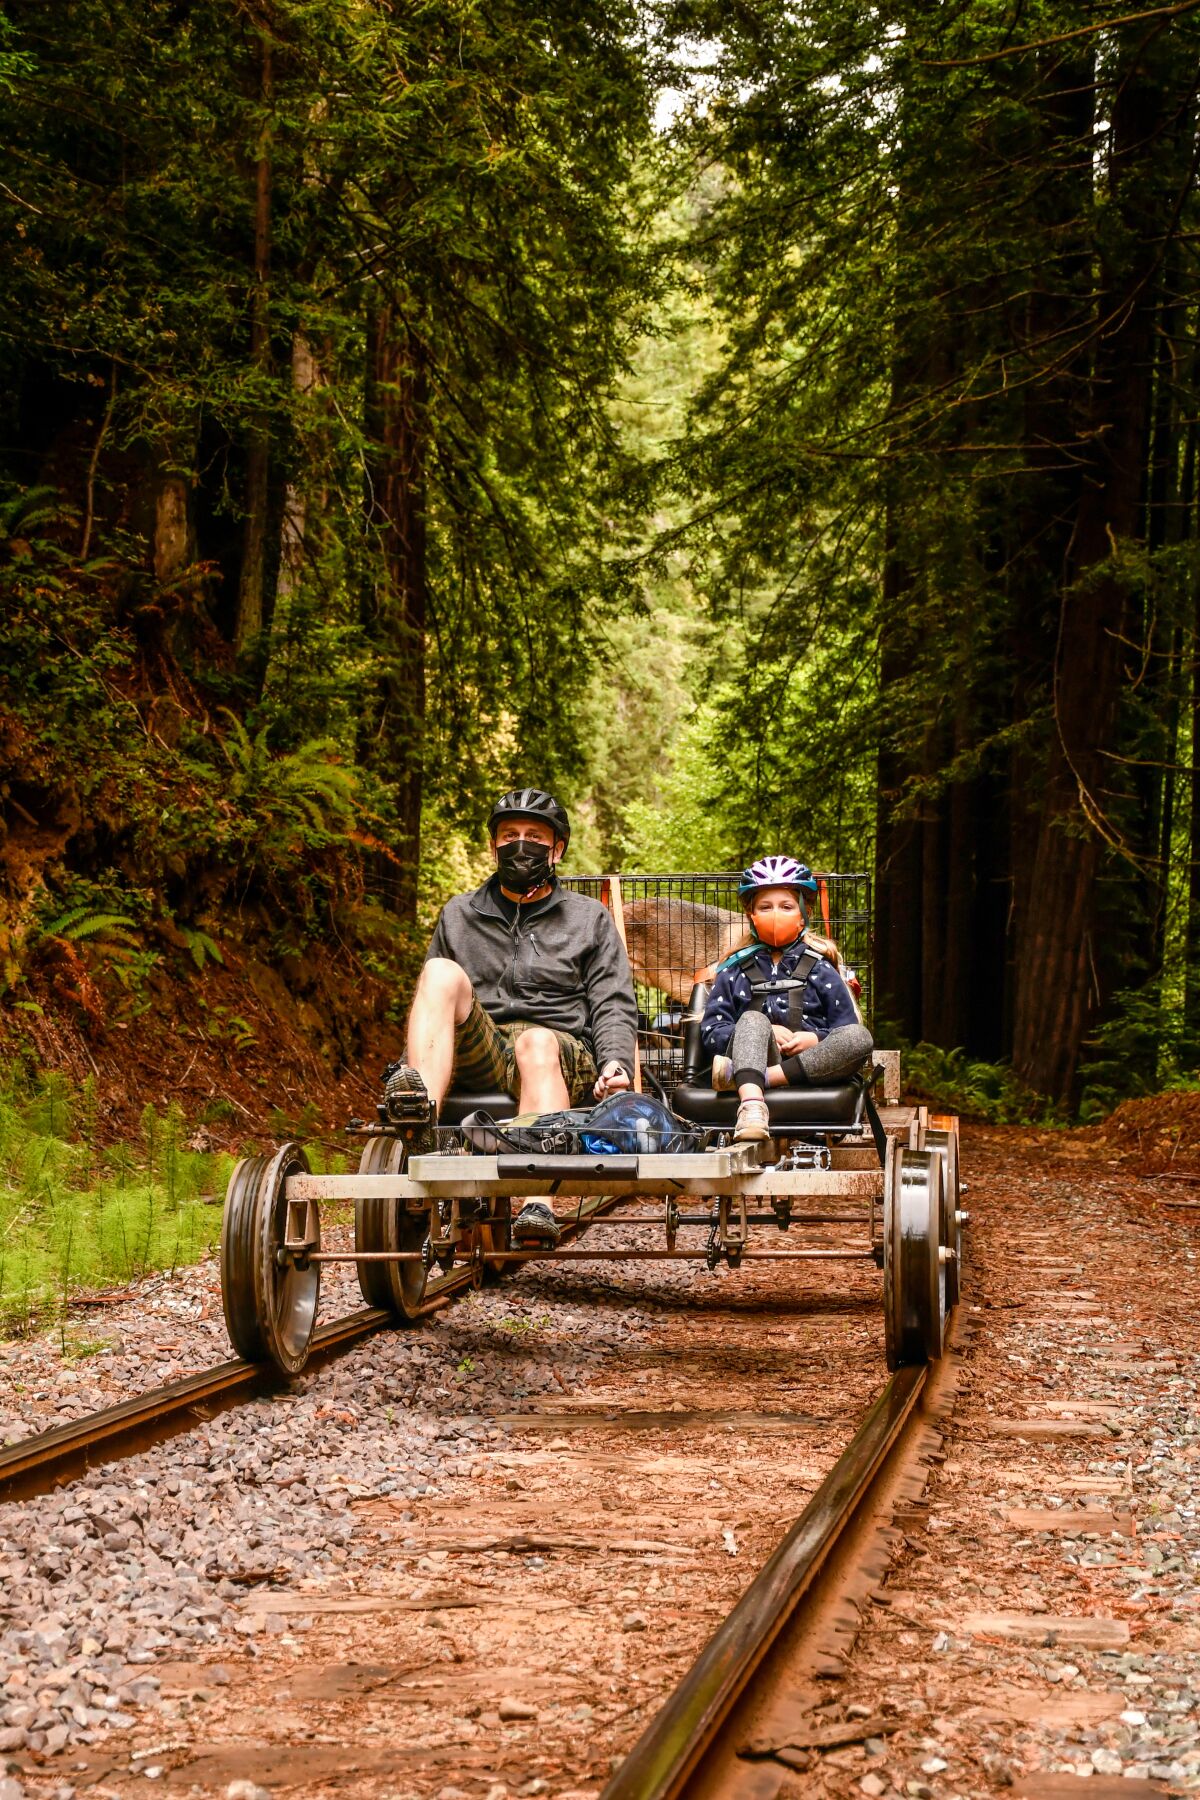 Two people on a railbike pedal through a redwood forest.